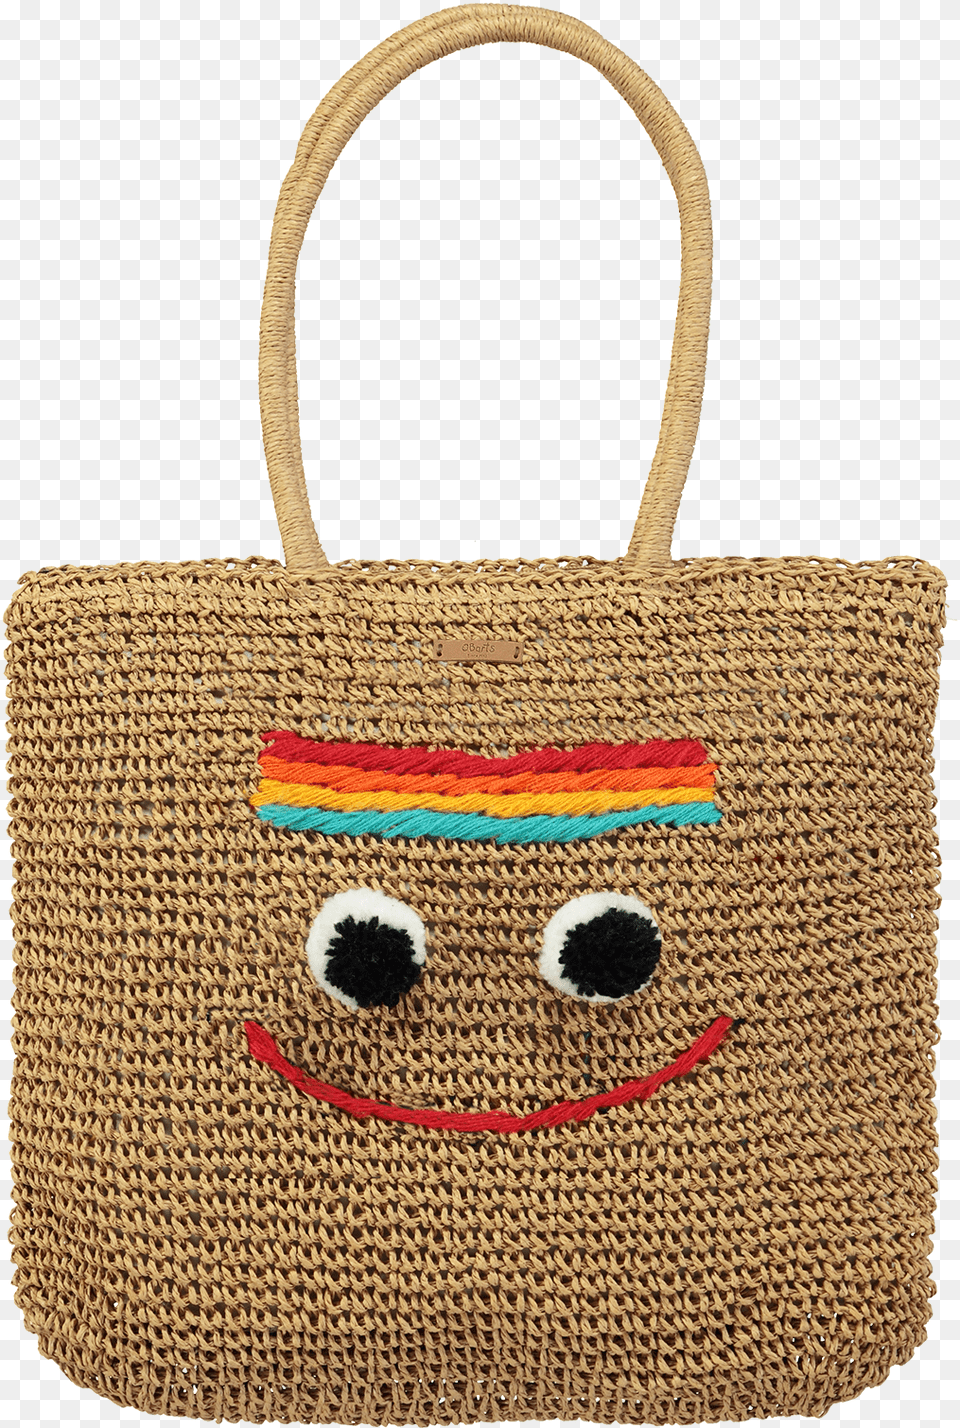 Tap To Expand Tote Bag, Accessories, Handbag, Purse, Tote Bag Png